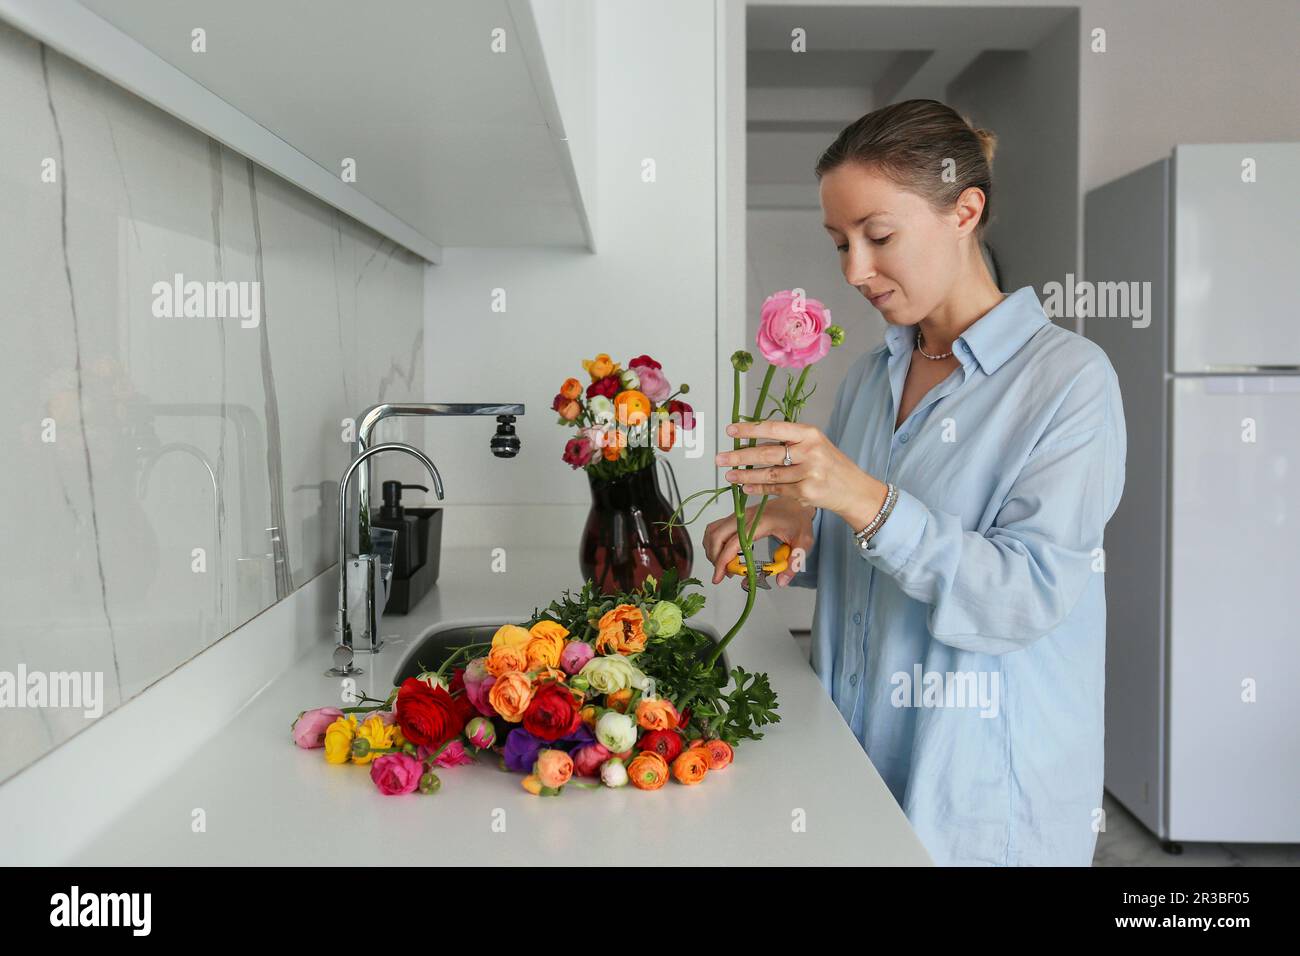 Woman pruning flowers in kitchen at home Stock Photo